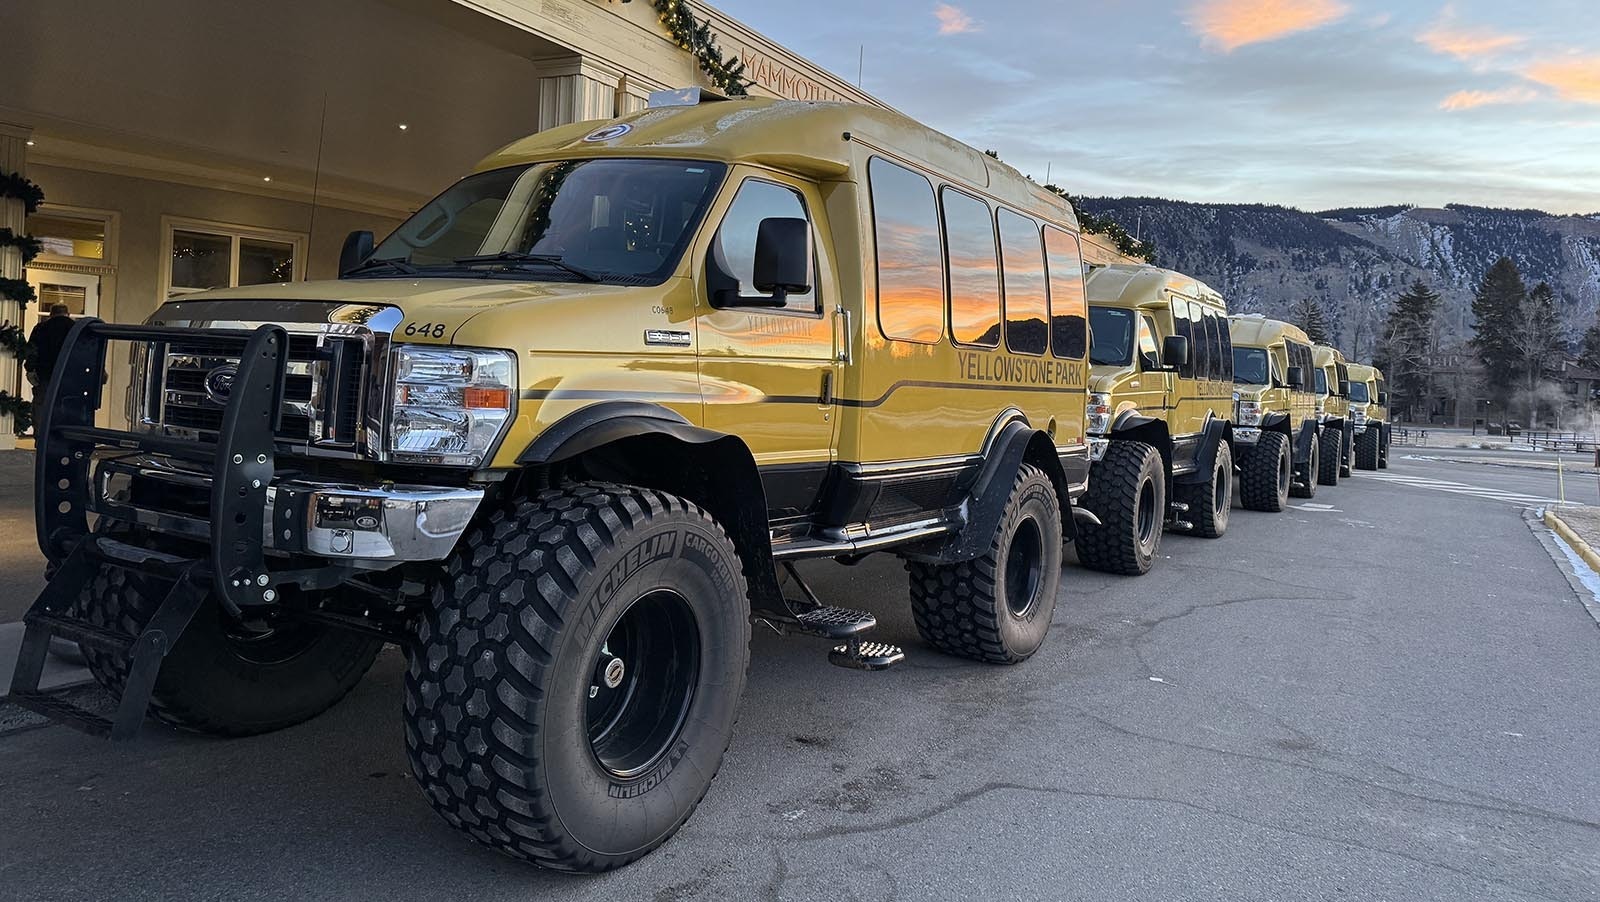 A fleet of Yellowstone snowcoaches awaiting passengers at Mammoth Hot Springs. The giant tires are inflated to 12 psi to ensure they can traverse the park's snow-covered roads.